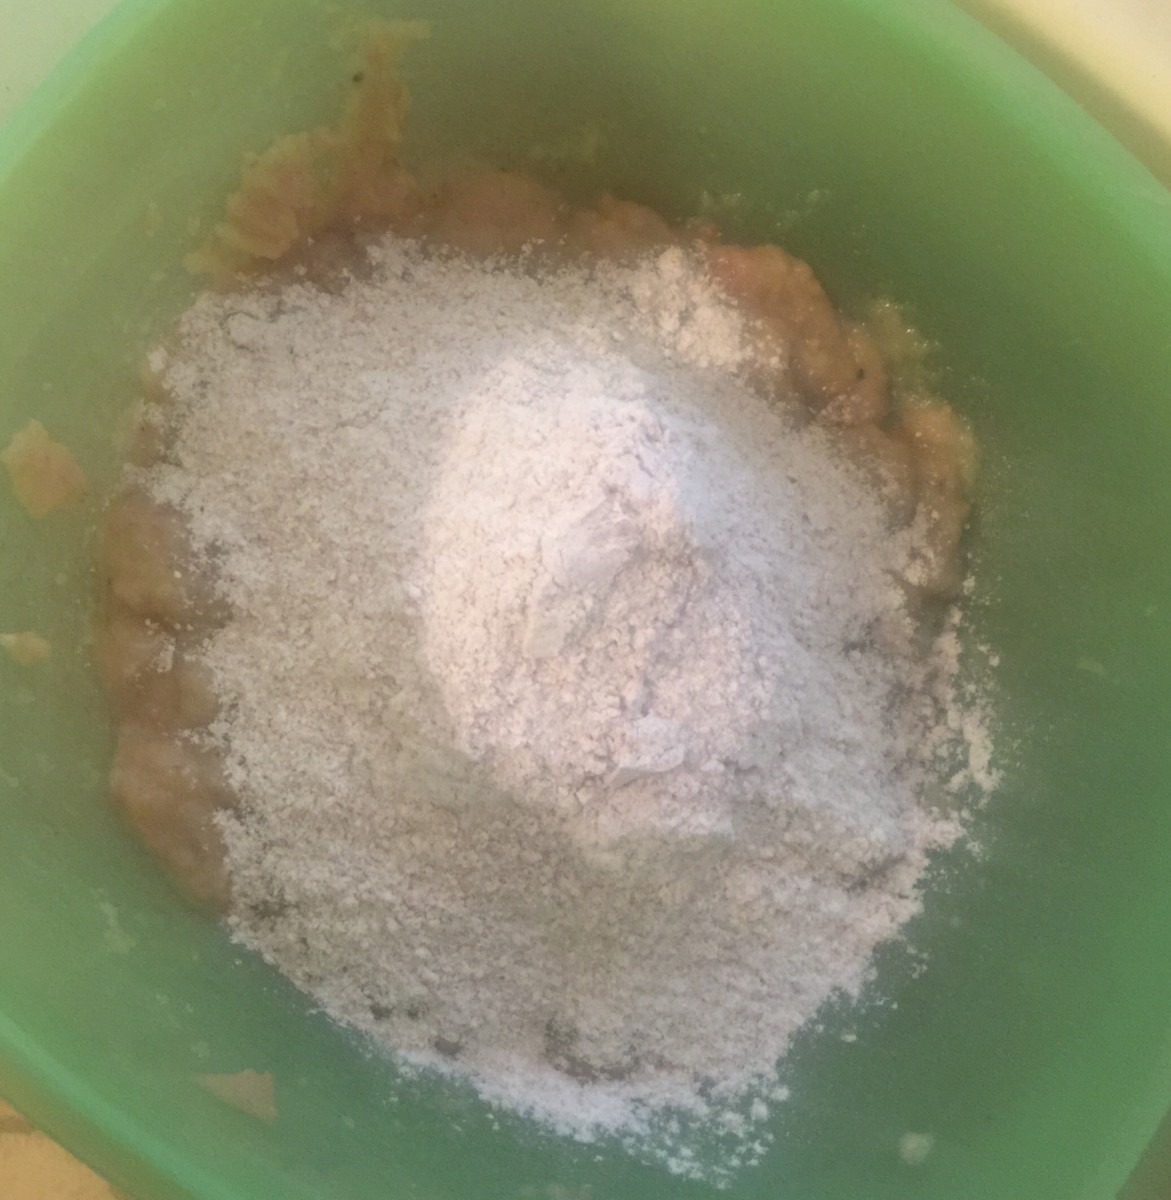 I dumped the whole cup of flour in at once, but you may choose to add 1/4 cup at a time as you stir the mixture.